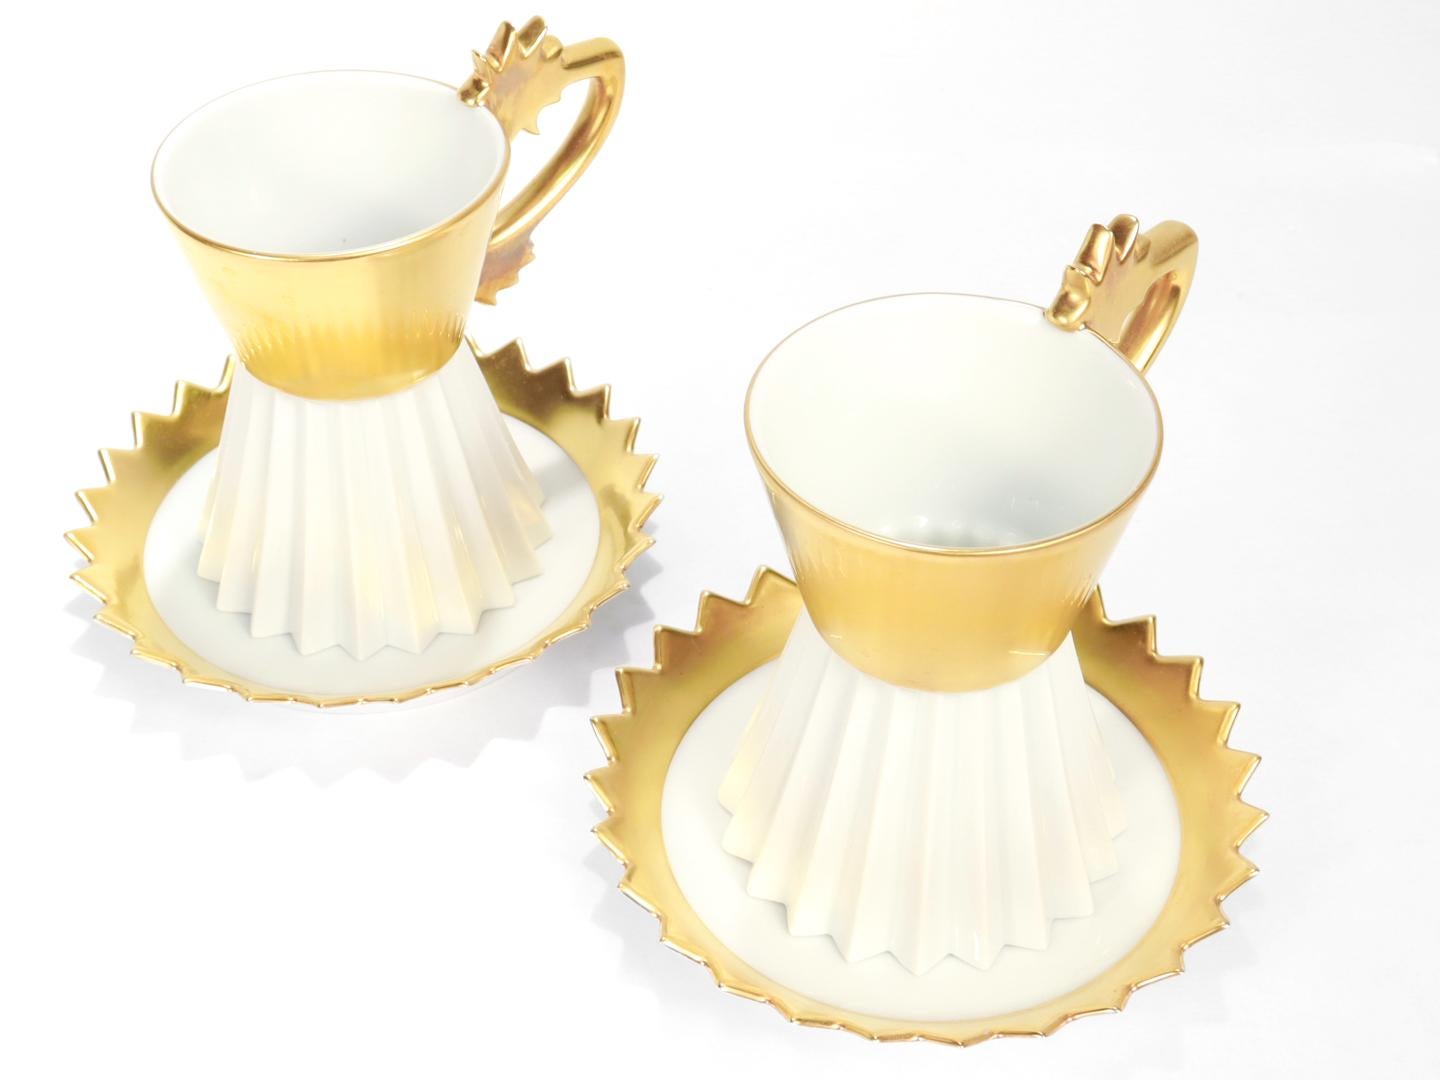 20th Century Pair of Rosenthal Studio Linie Gilt Porcelain No. 23 Cup & Saucers by Otto Piene For Sale